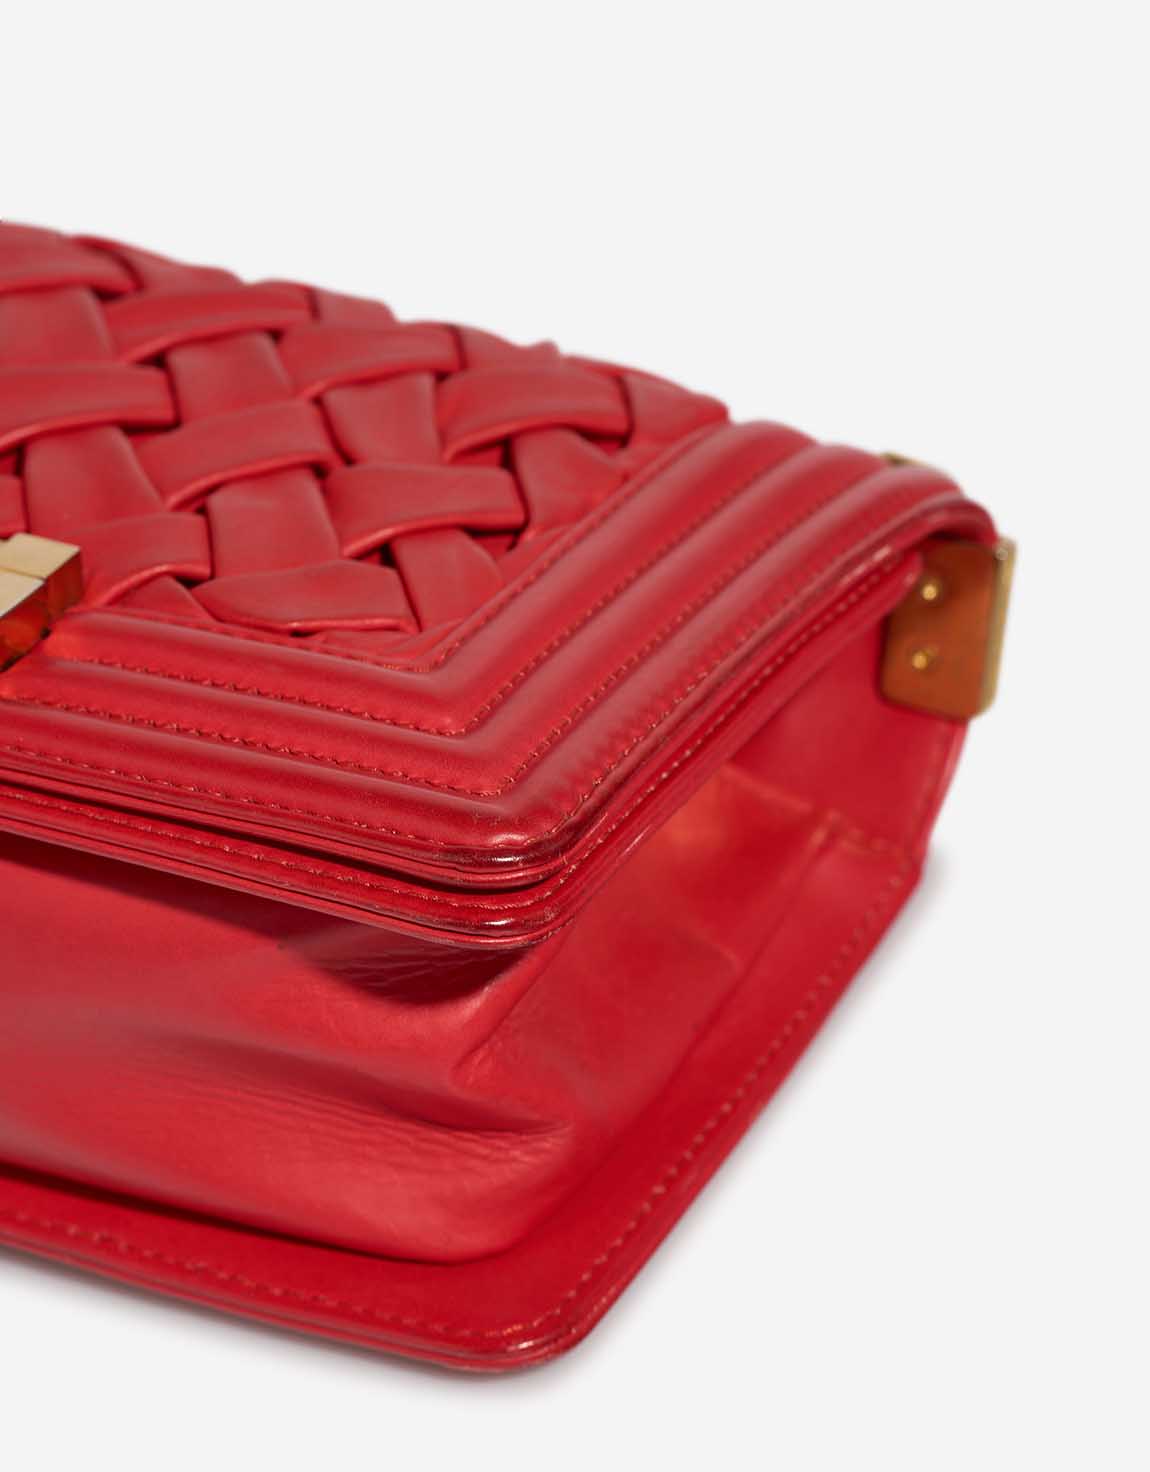 Chanel Boy Small Lamb Red Signs of wear | Sell your designer bag